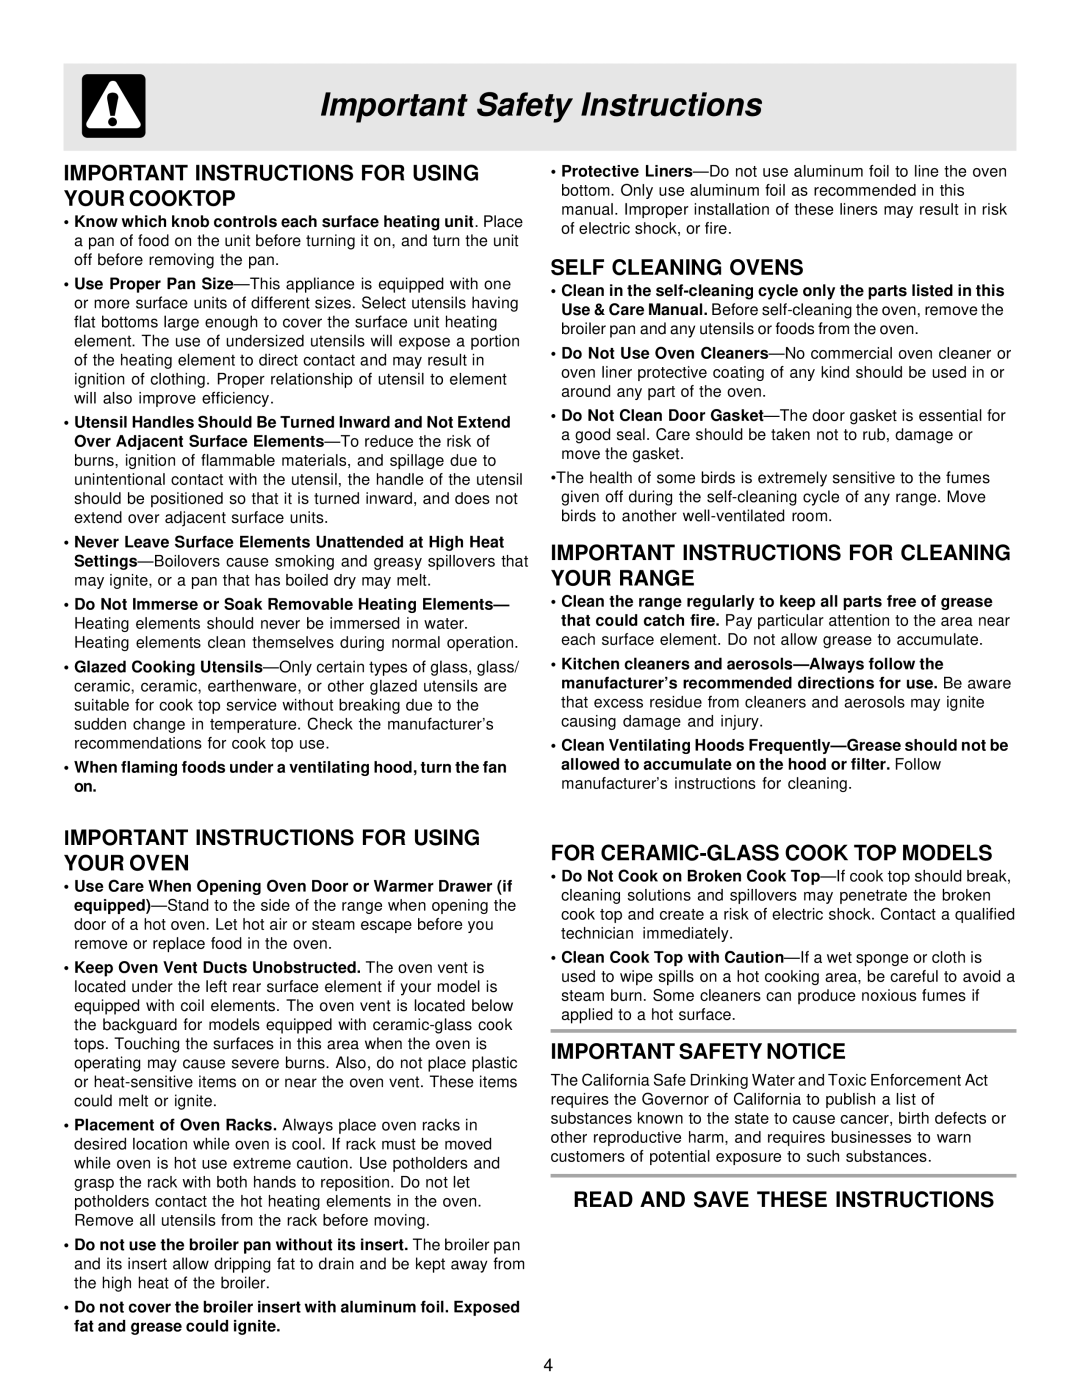 Frigidaire ES40 Important Instructions For Using Your Cooktop, Self Cleaning Ovens, For Ceramic-Glass Cook Top Models 